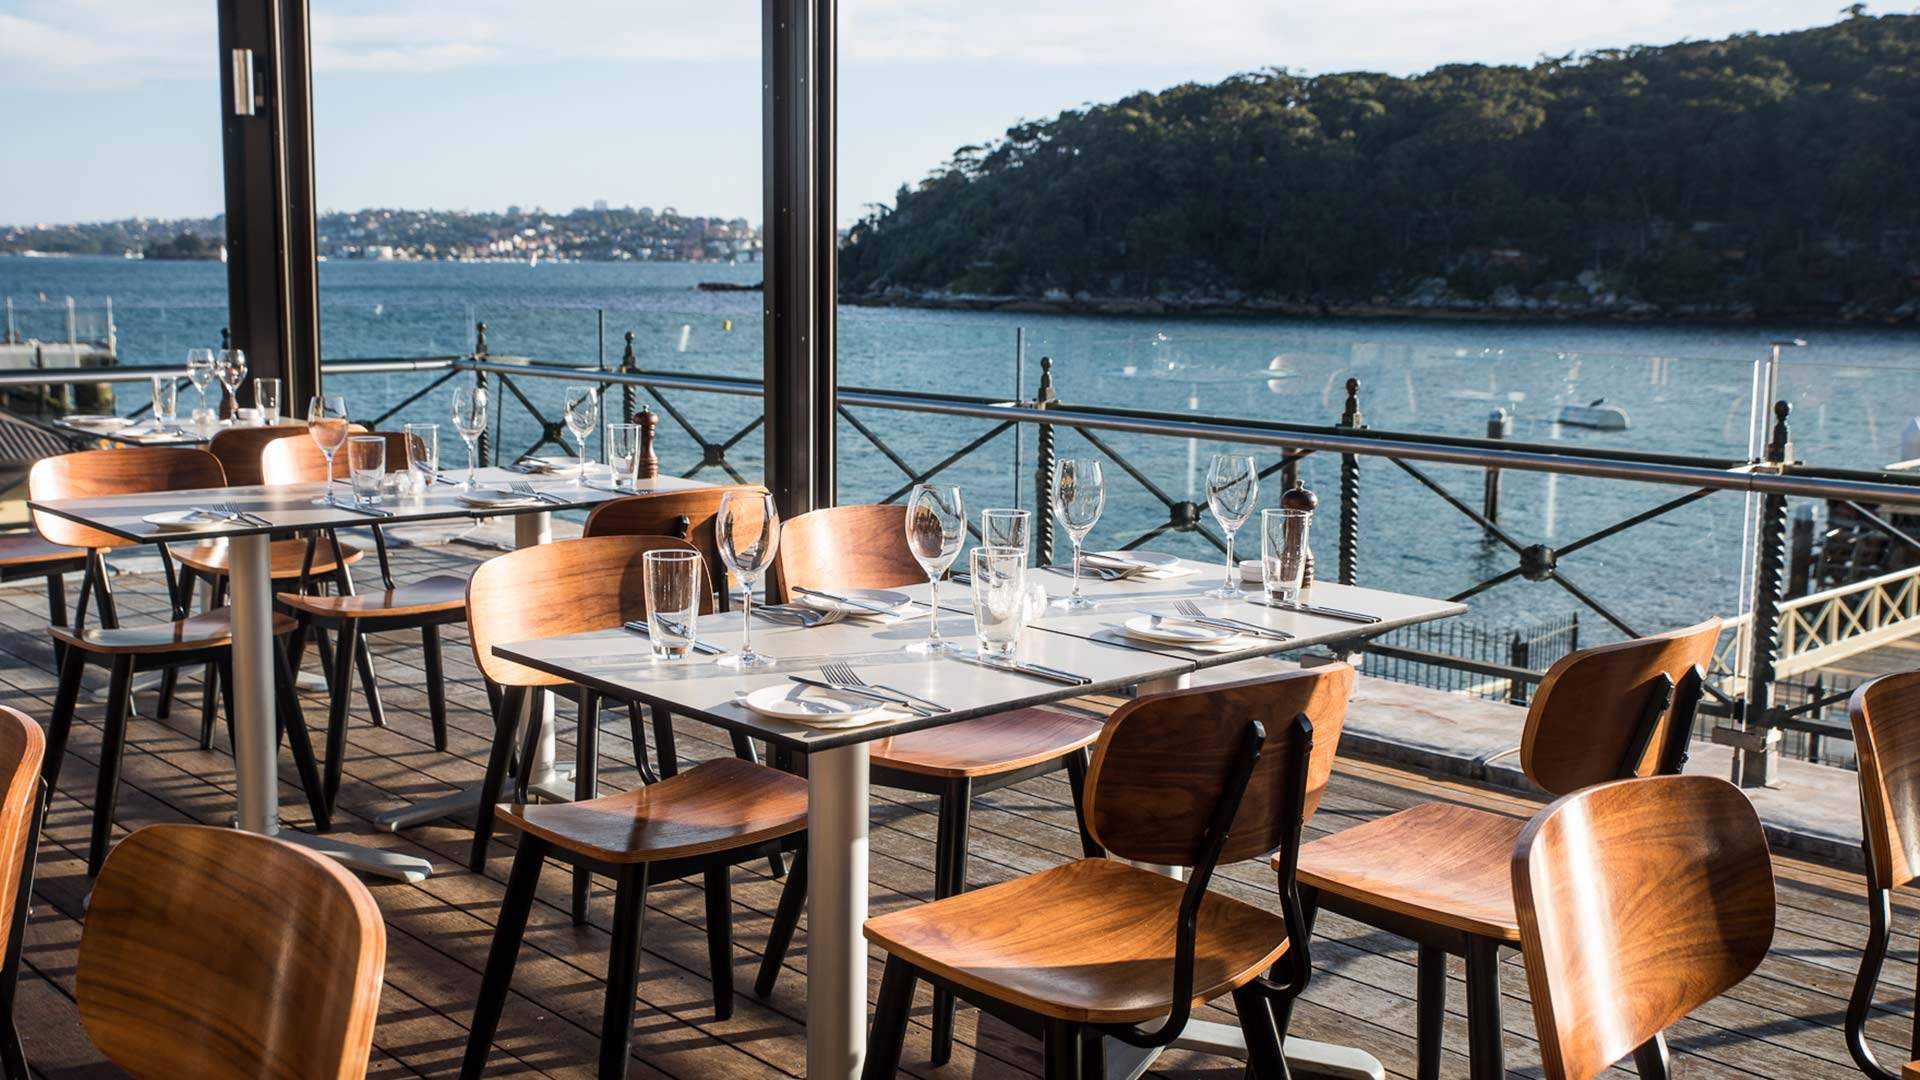 We're Giving Away Long Lunches at These Waterside Sydney Restaurants